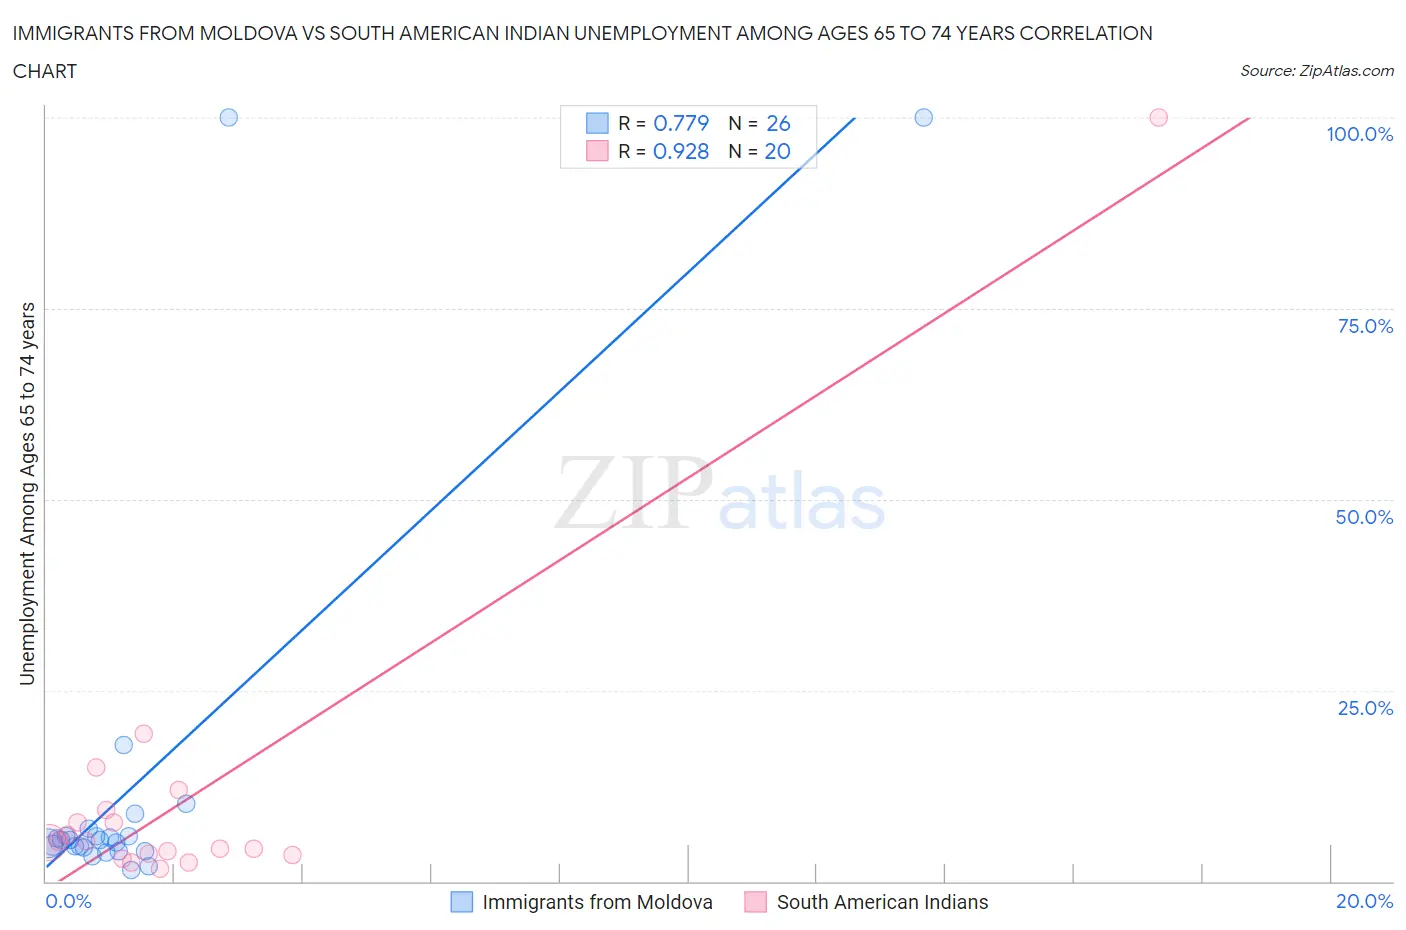 Immigrants from Moldova vs South American Indian Unemployment Among Ages 65 to 74 years